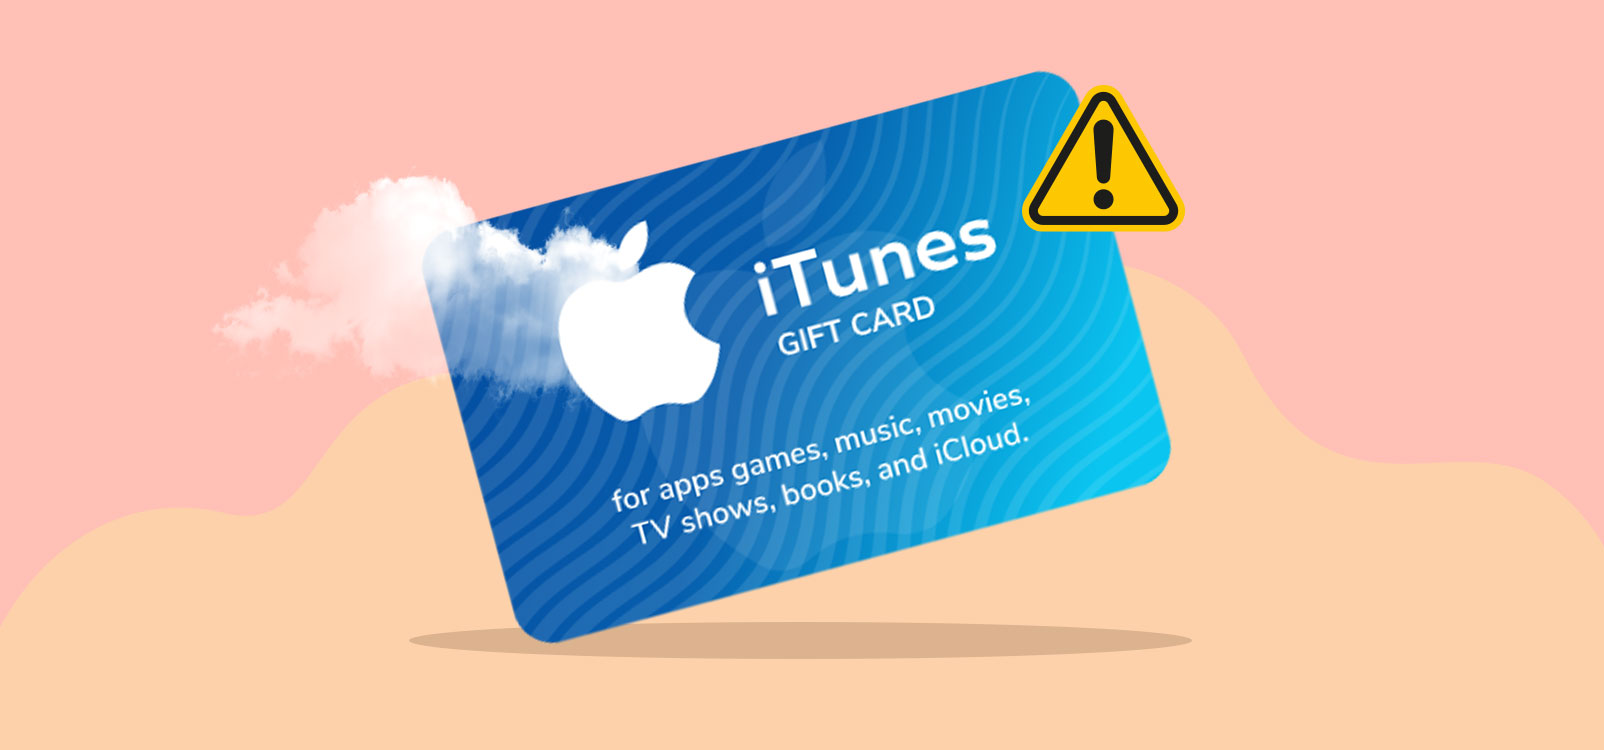 How to Resolve an Invalid iTunes Giftcard Glover